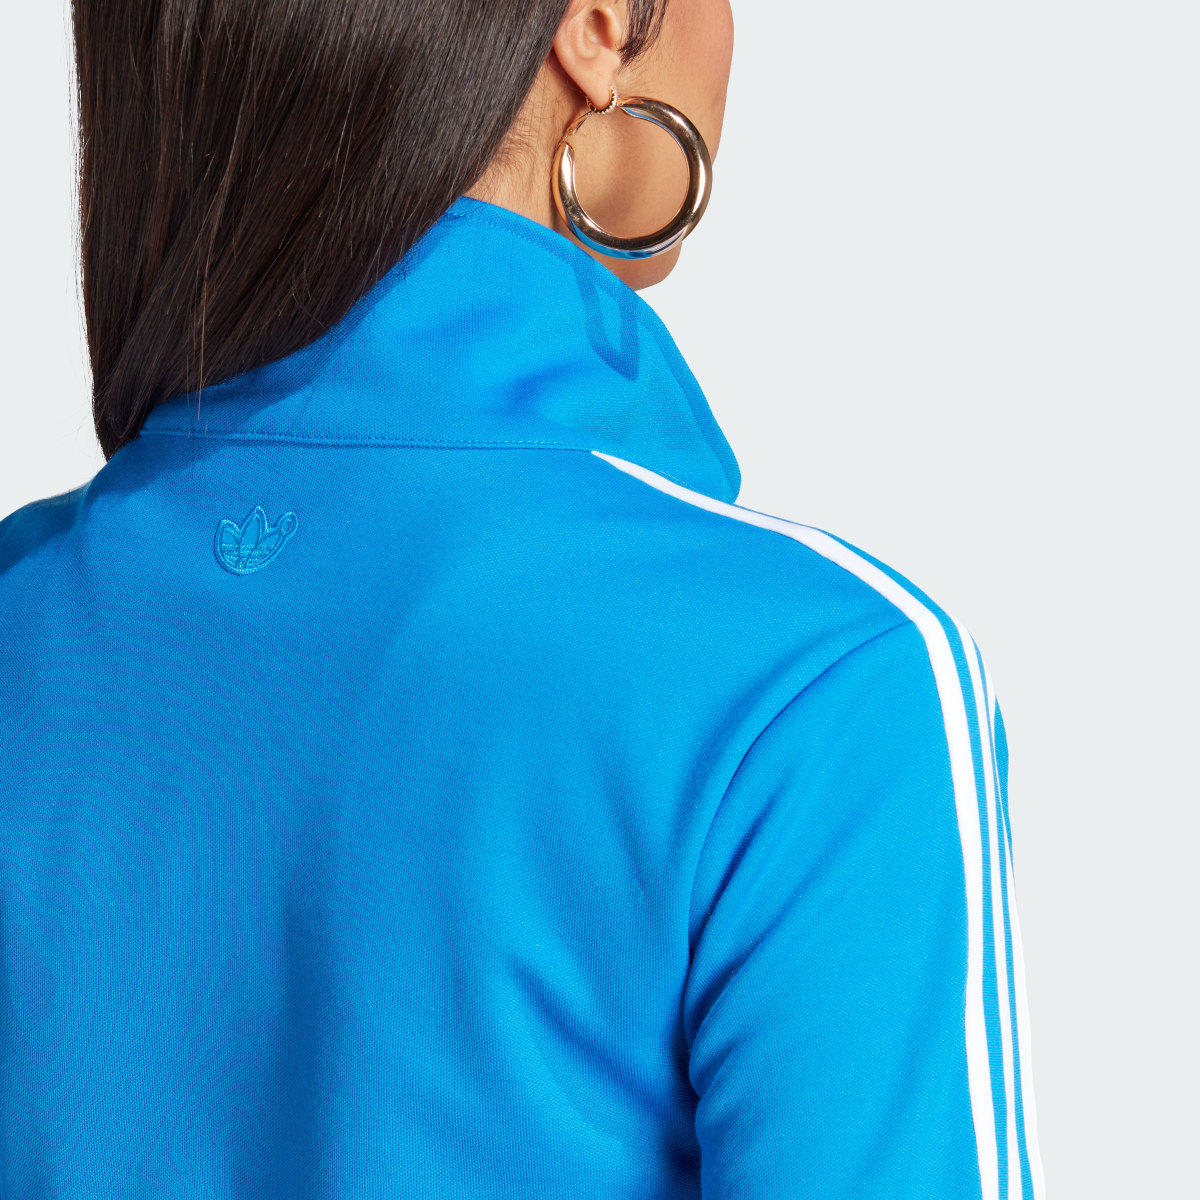 Adidas Track top Blue Version Montreal. 7